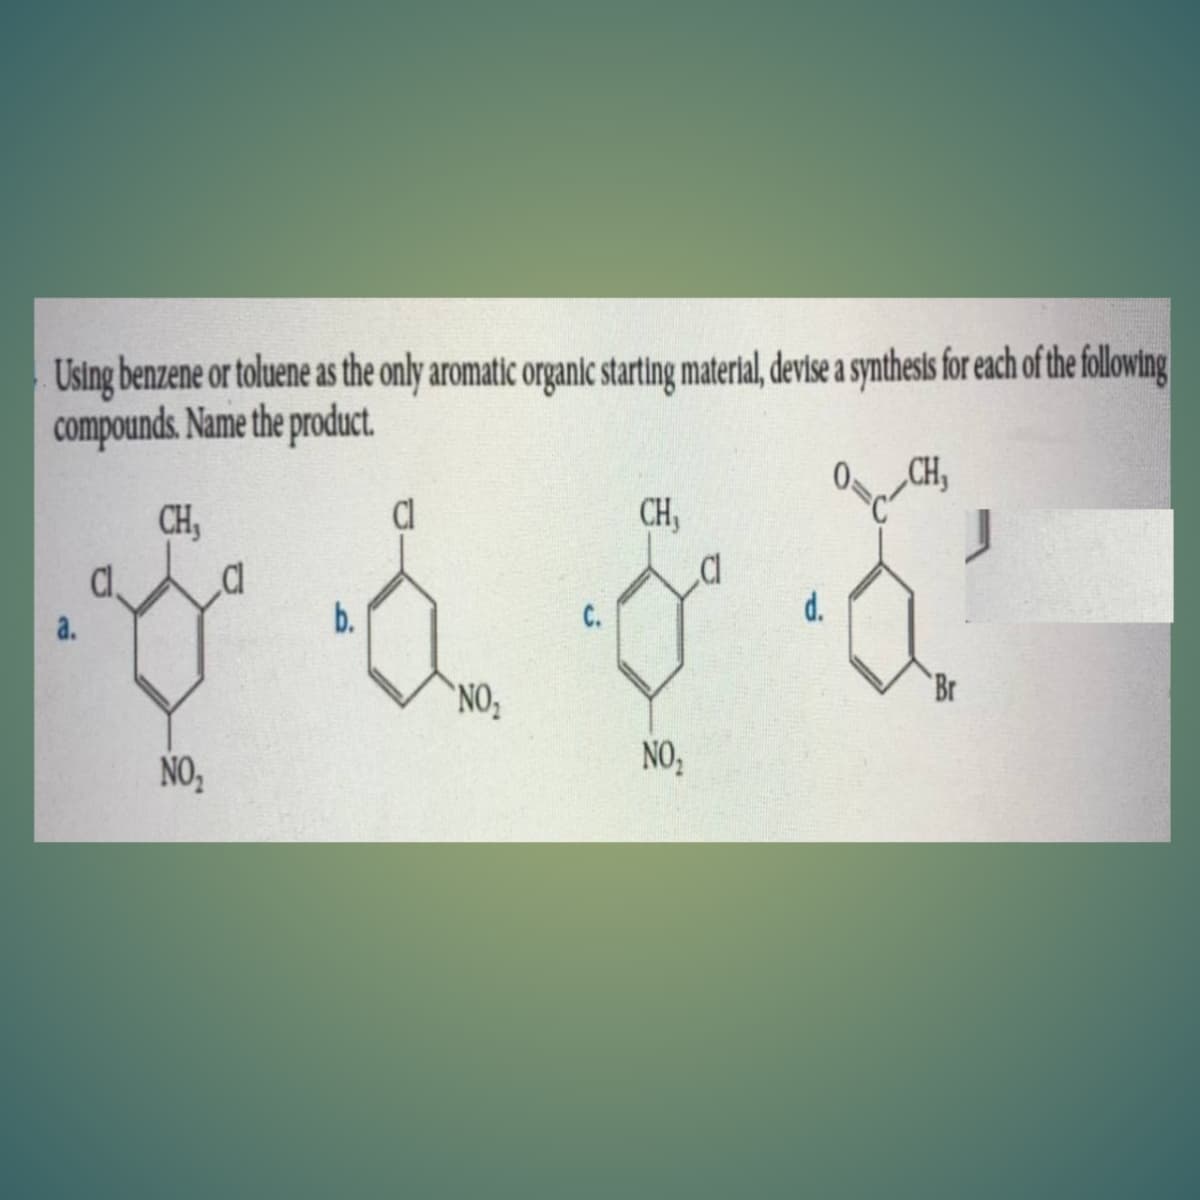 Using benzene or toluene as the only aromatic organic starting material, devise a synthests for each of the following
compounds. Name the product
„CH,
CH,
Cl
CH,
b.
C.
d.
a.
`NO,
Br
NO,
NO,
